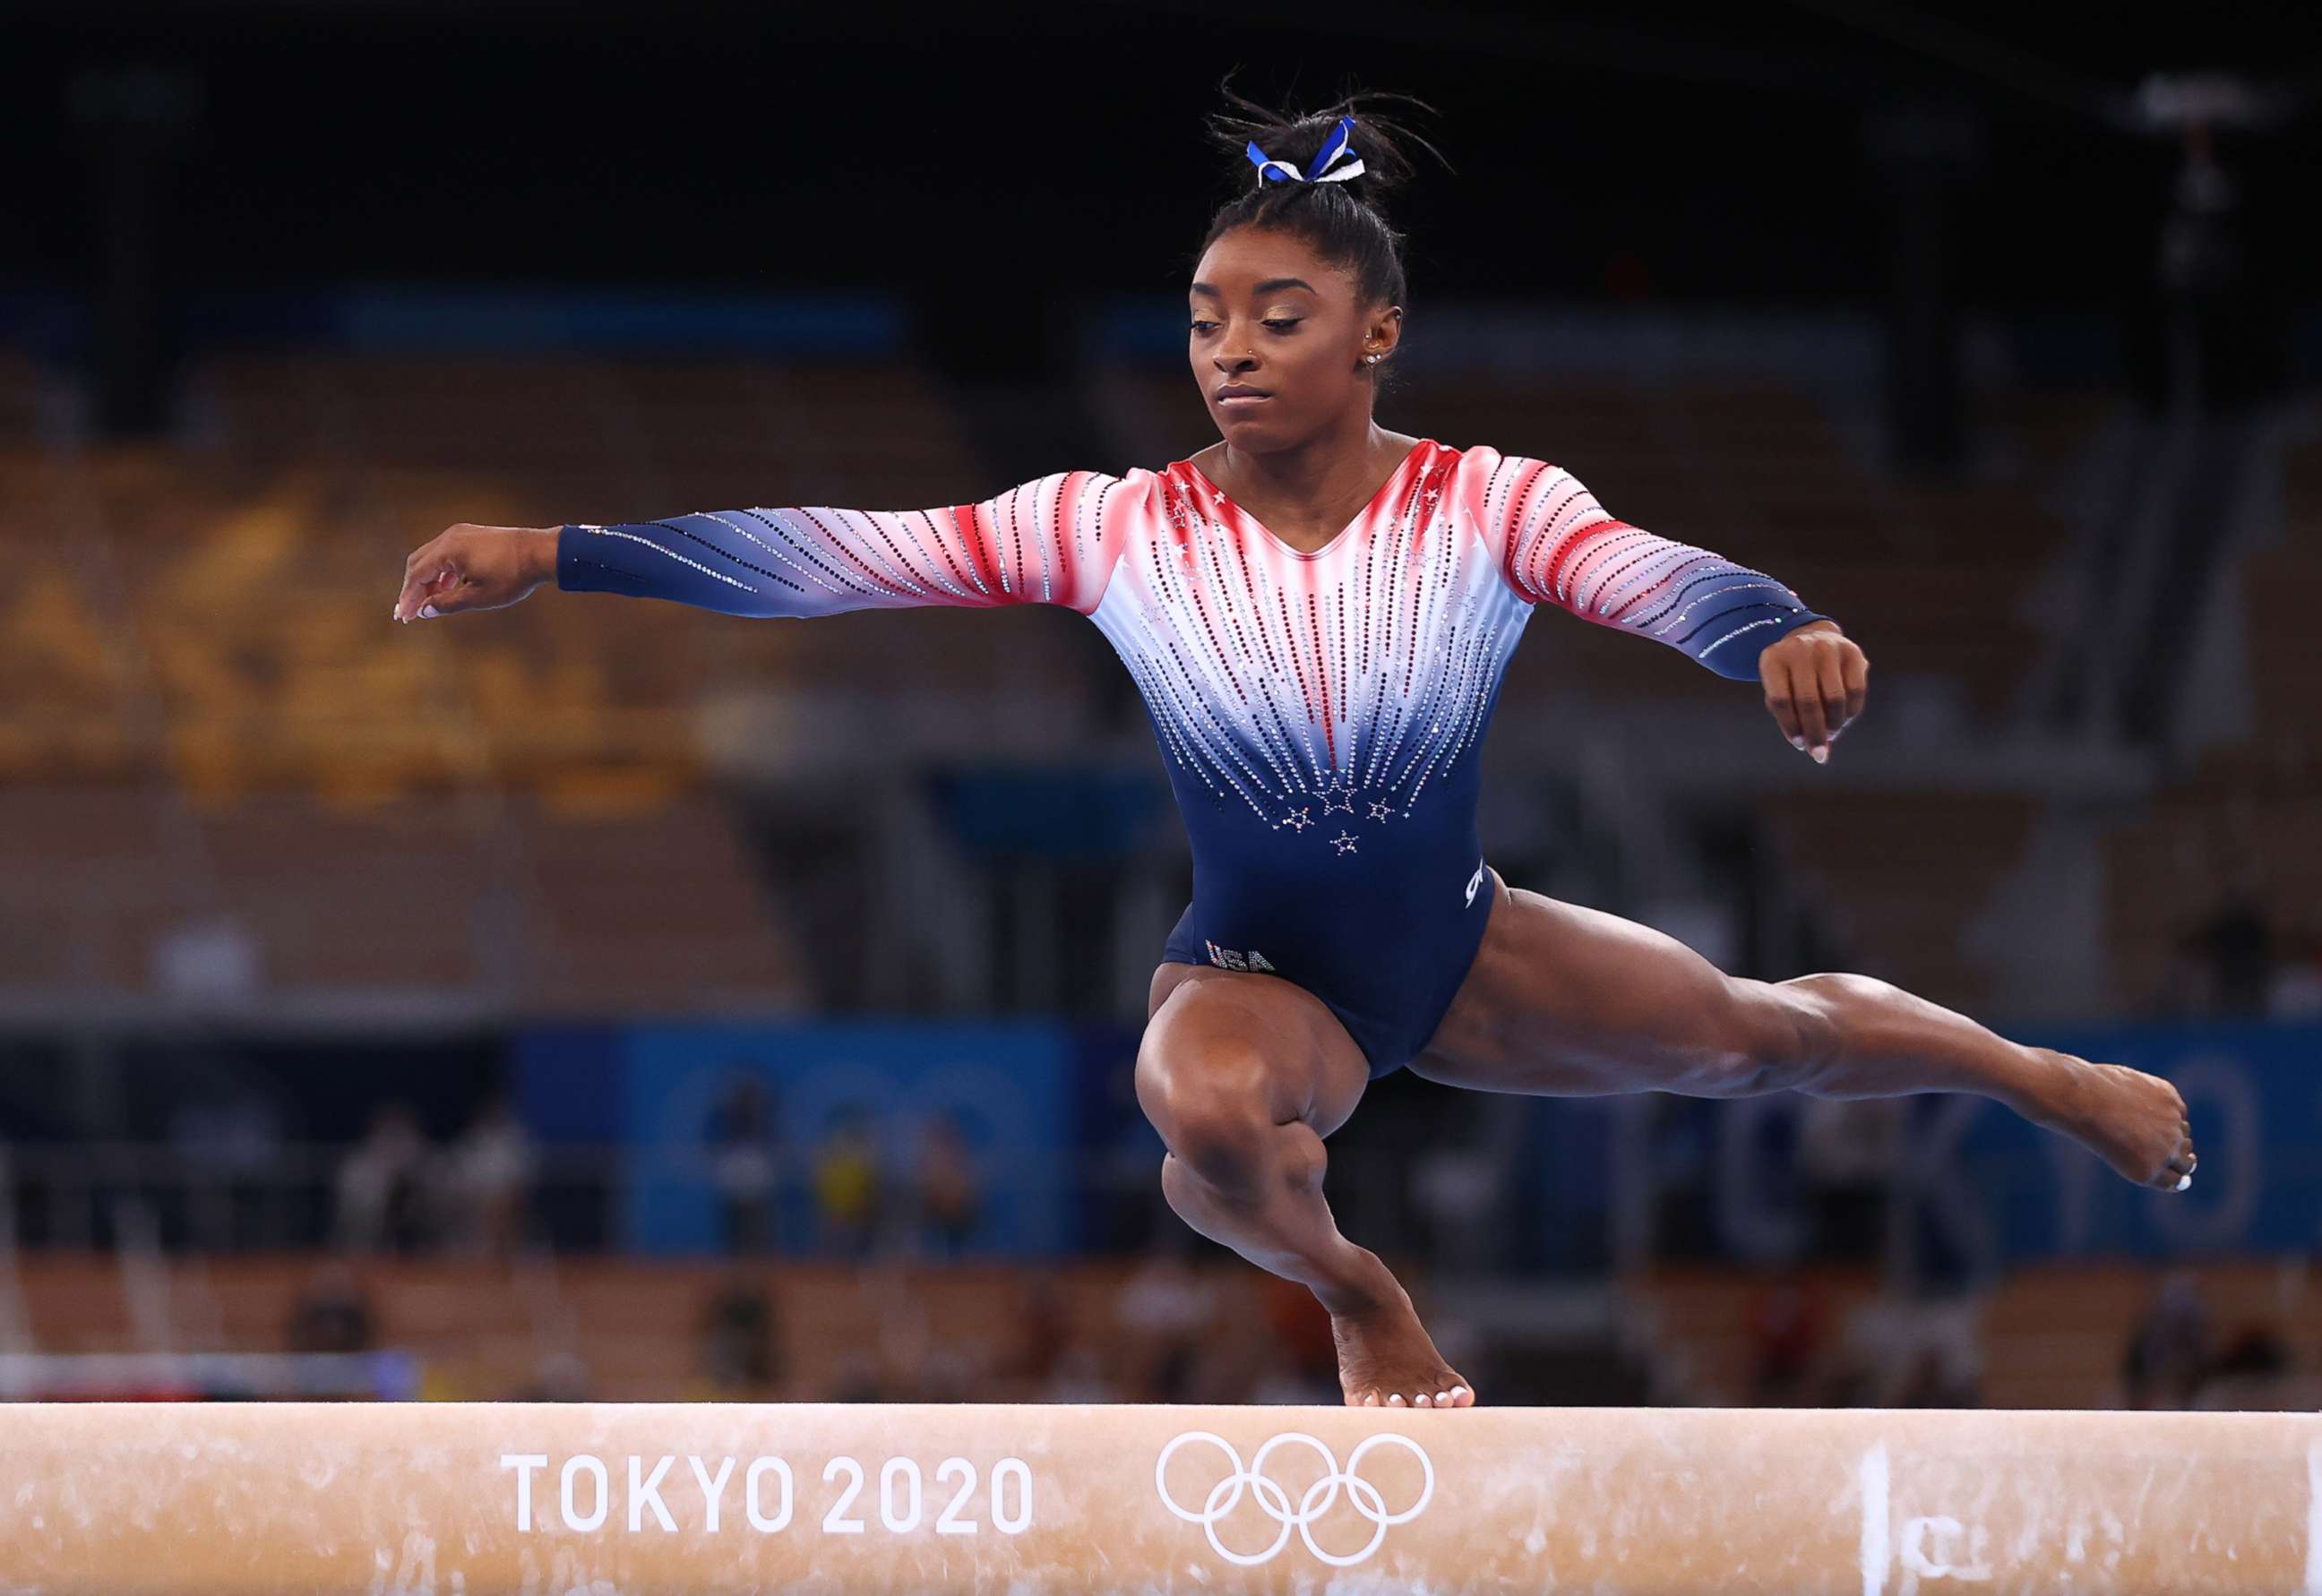 PHOTO: Simone Biles performs on the balance beam during the Tokyo 2020 Olympics on Aug. 3, 2021, in Tokyo.